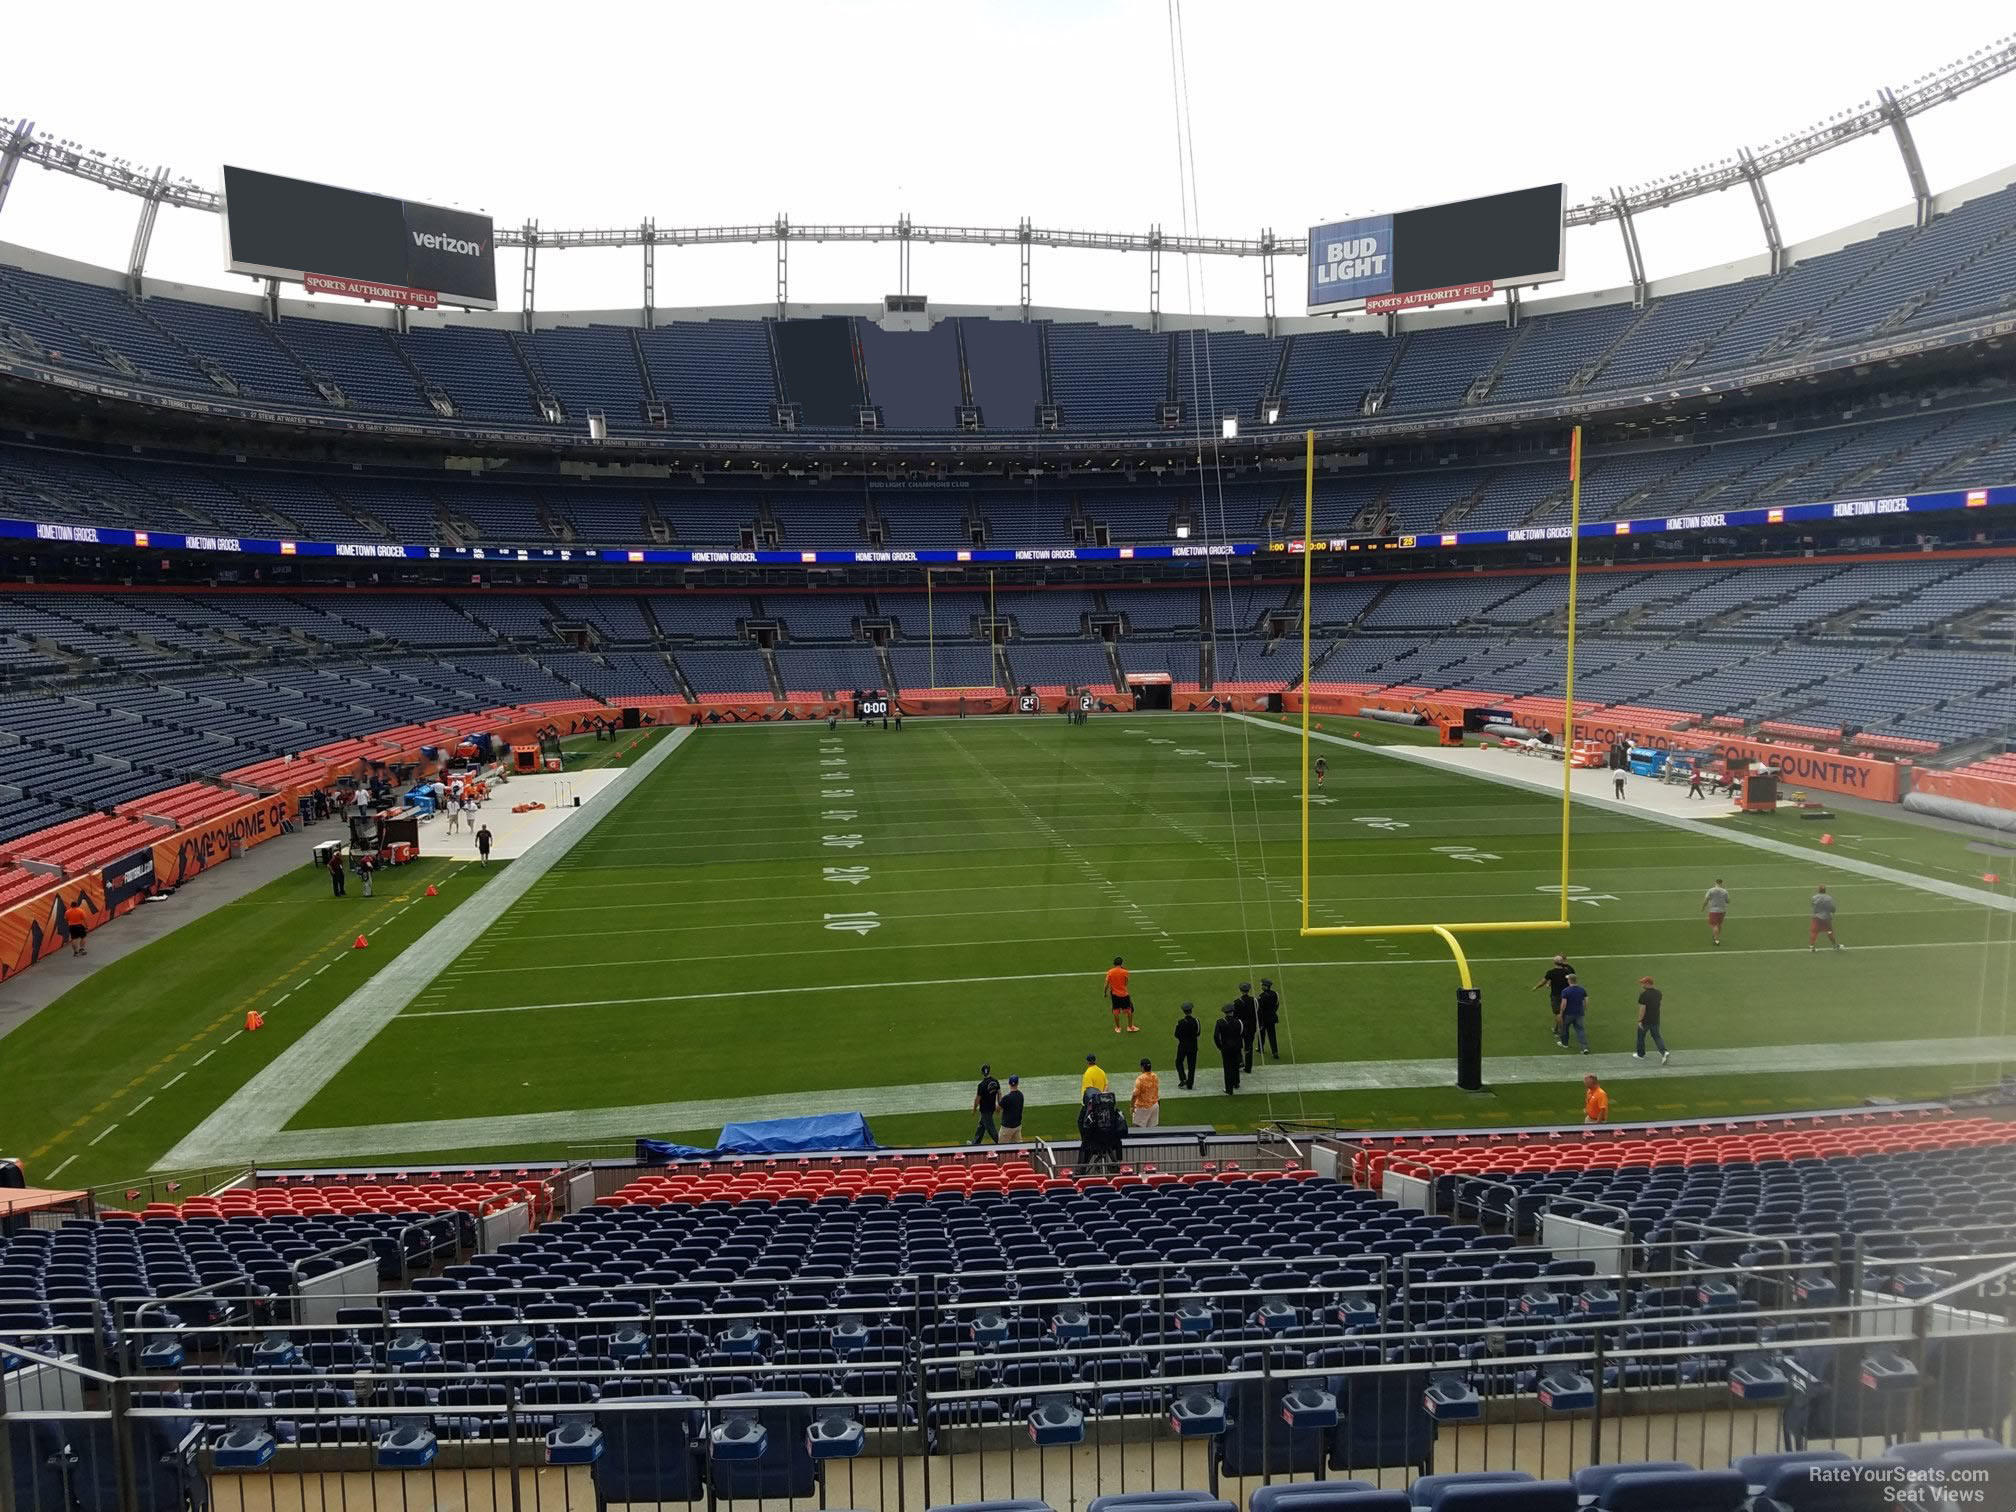 section 133, row 30 seat view  - empower field (at mile high)